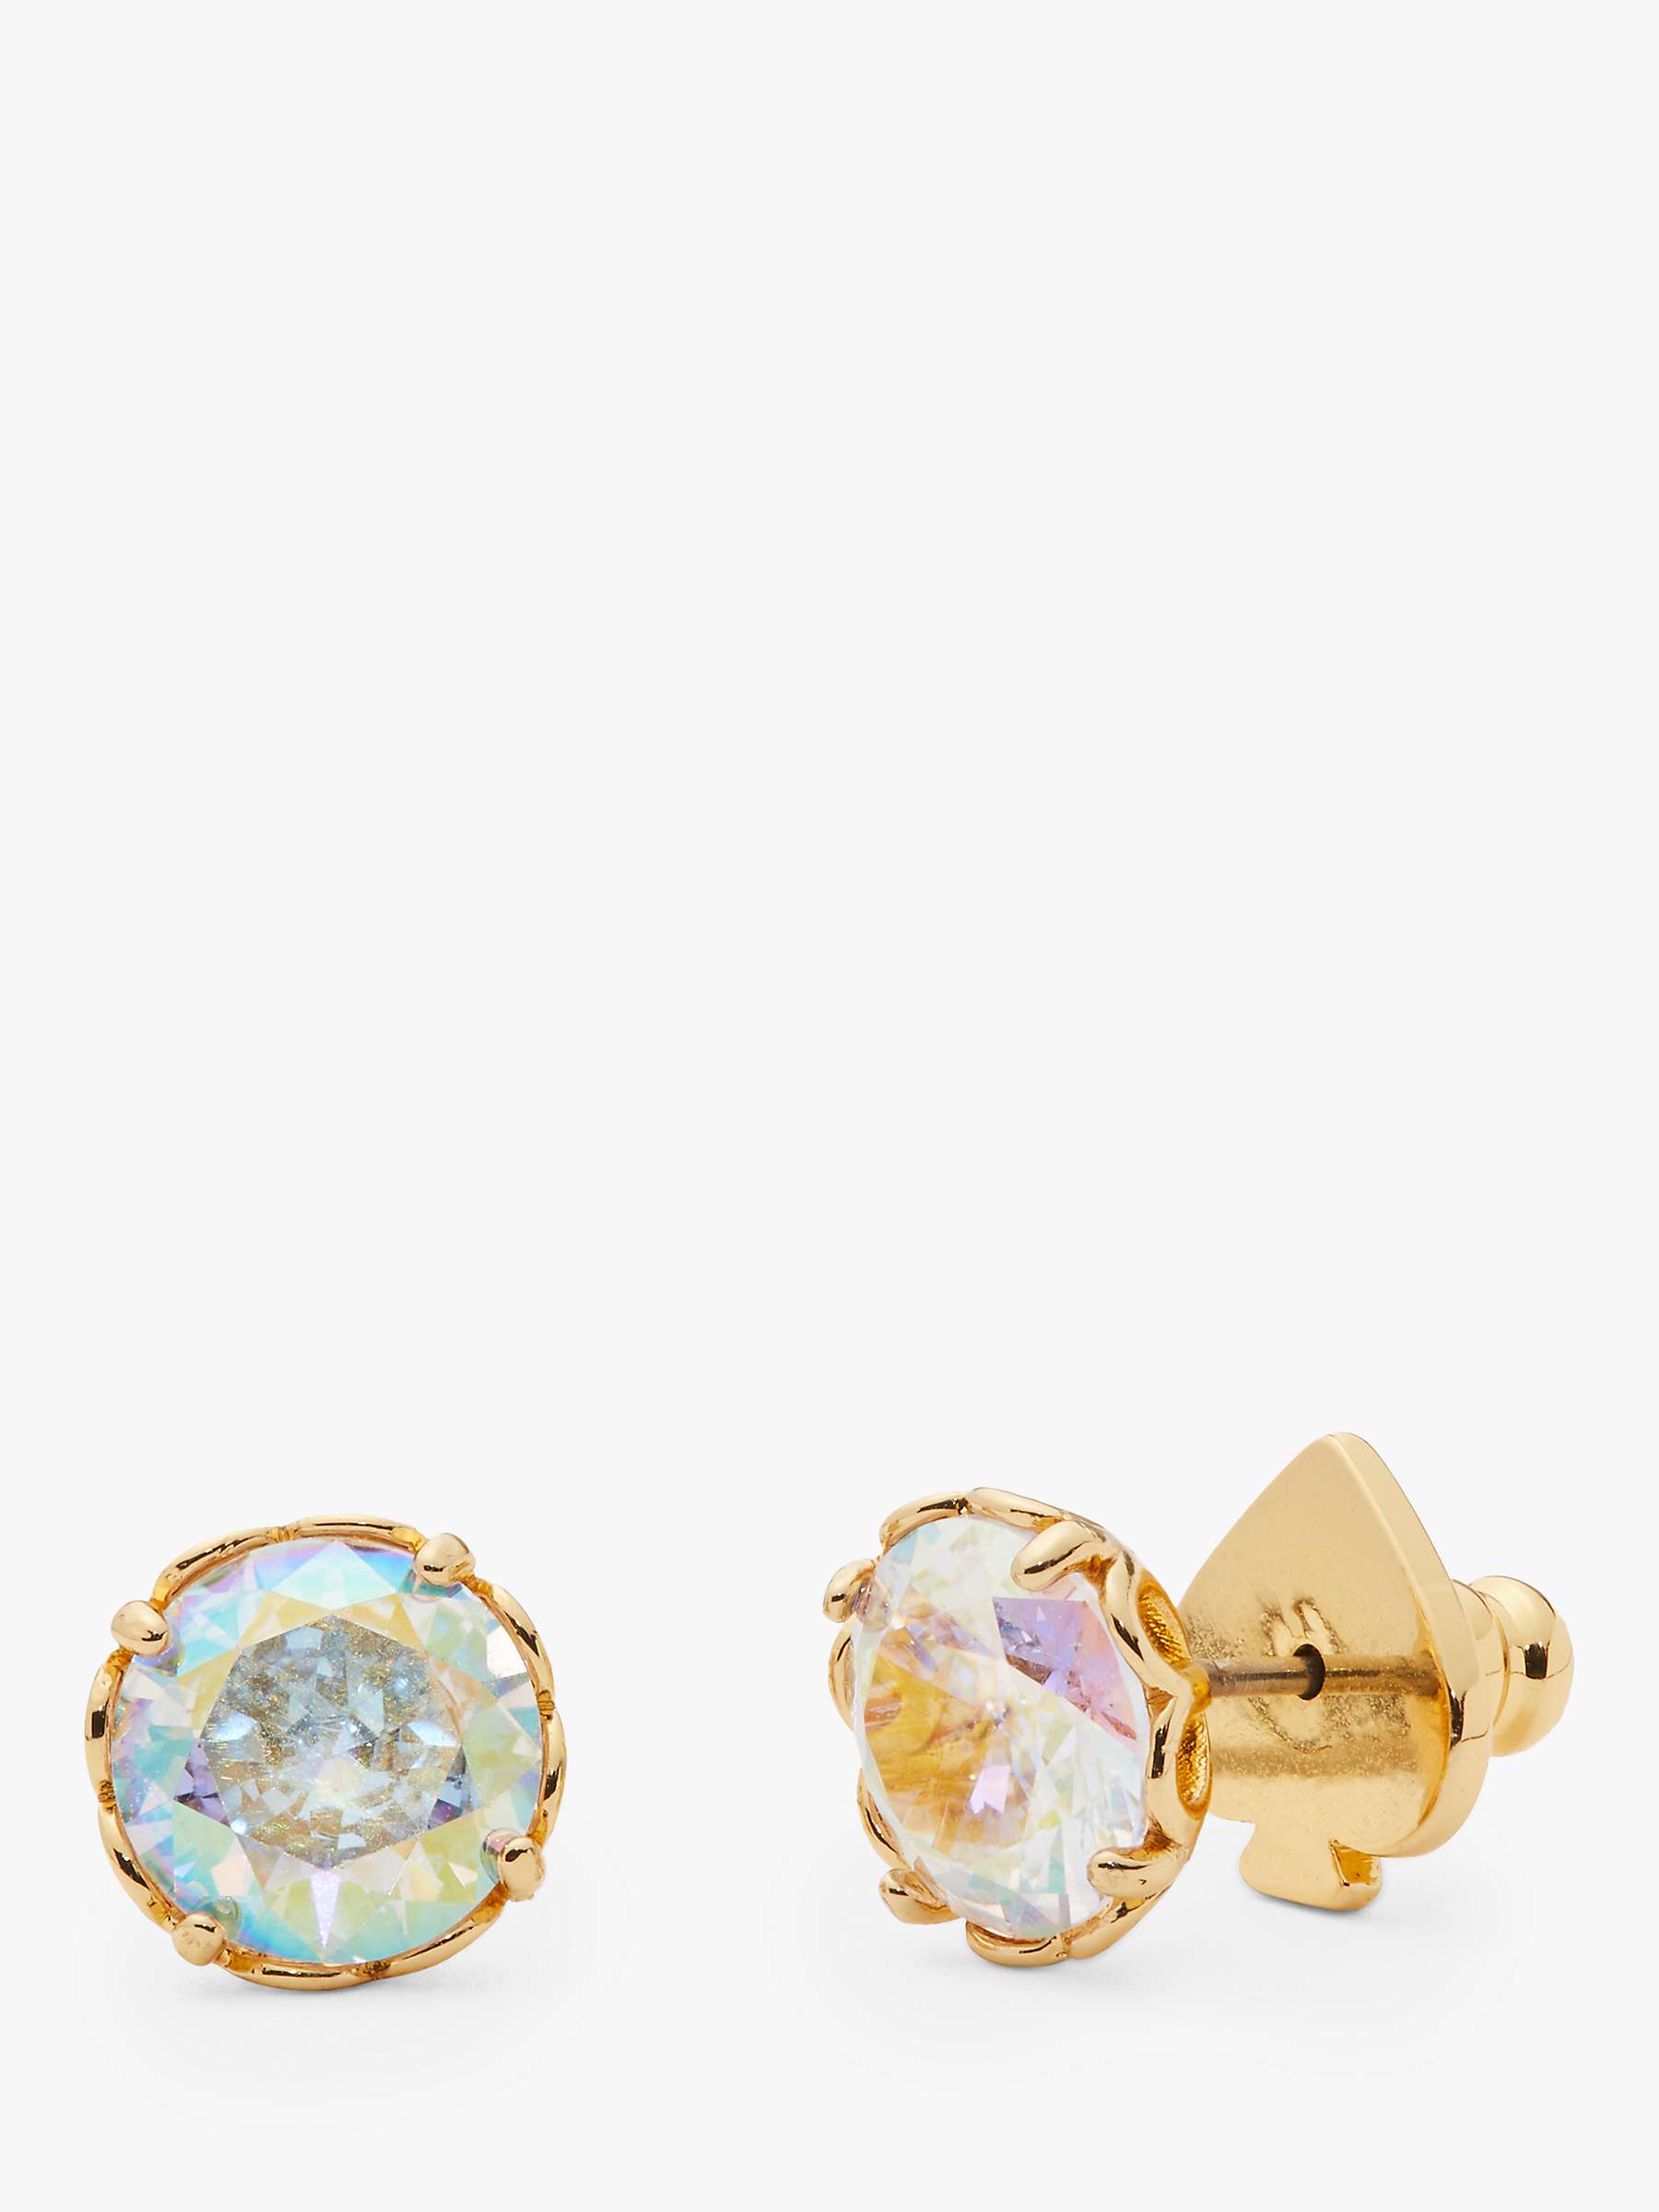 Buy kate spade new york That Sparkle Cubic Zirconia Stud Earrings, Gold/Multi Online at johnlewis.com